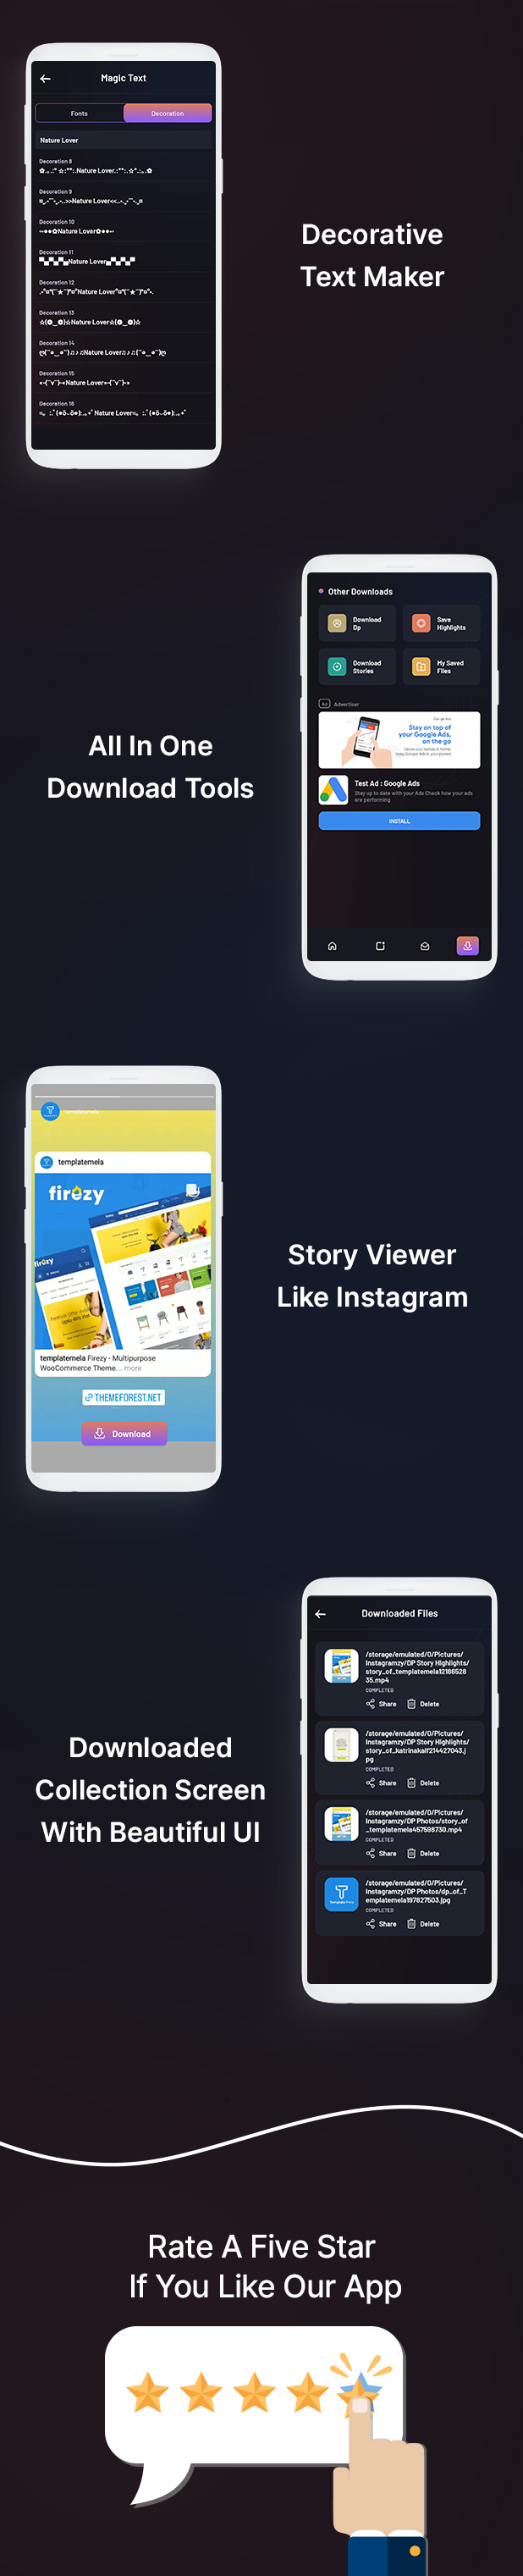 InstaGramzy - All in one Instagram toolkit with Followers Analytics - 9